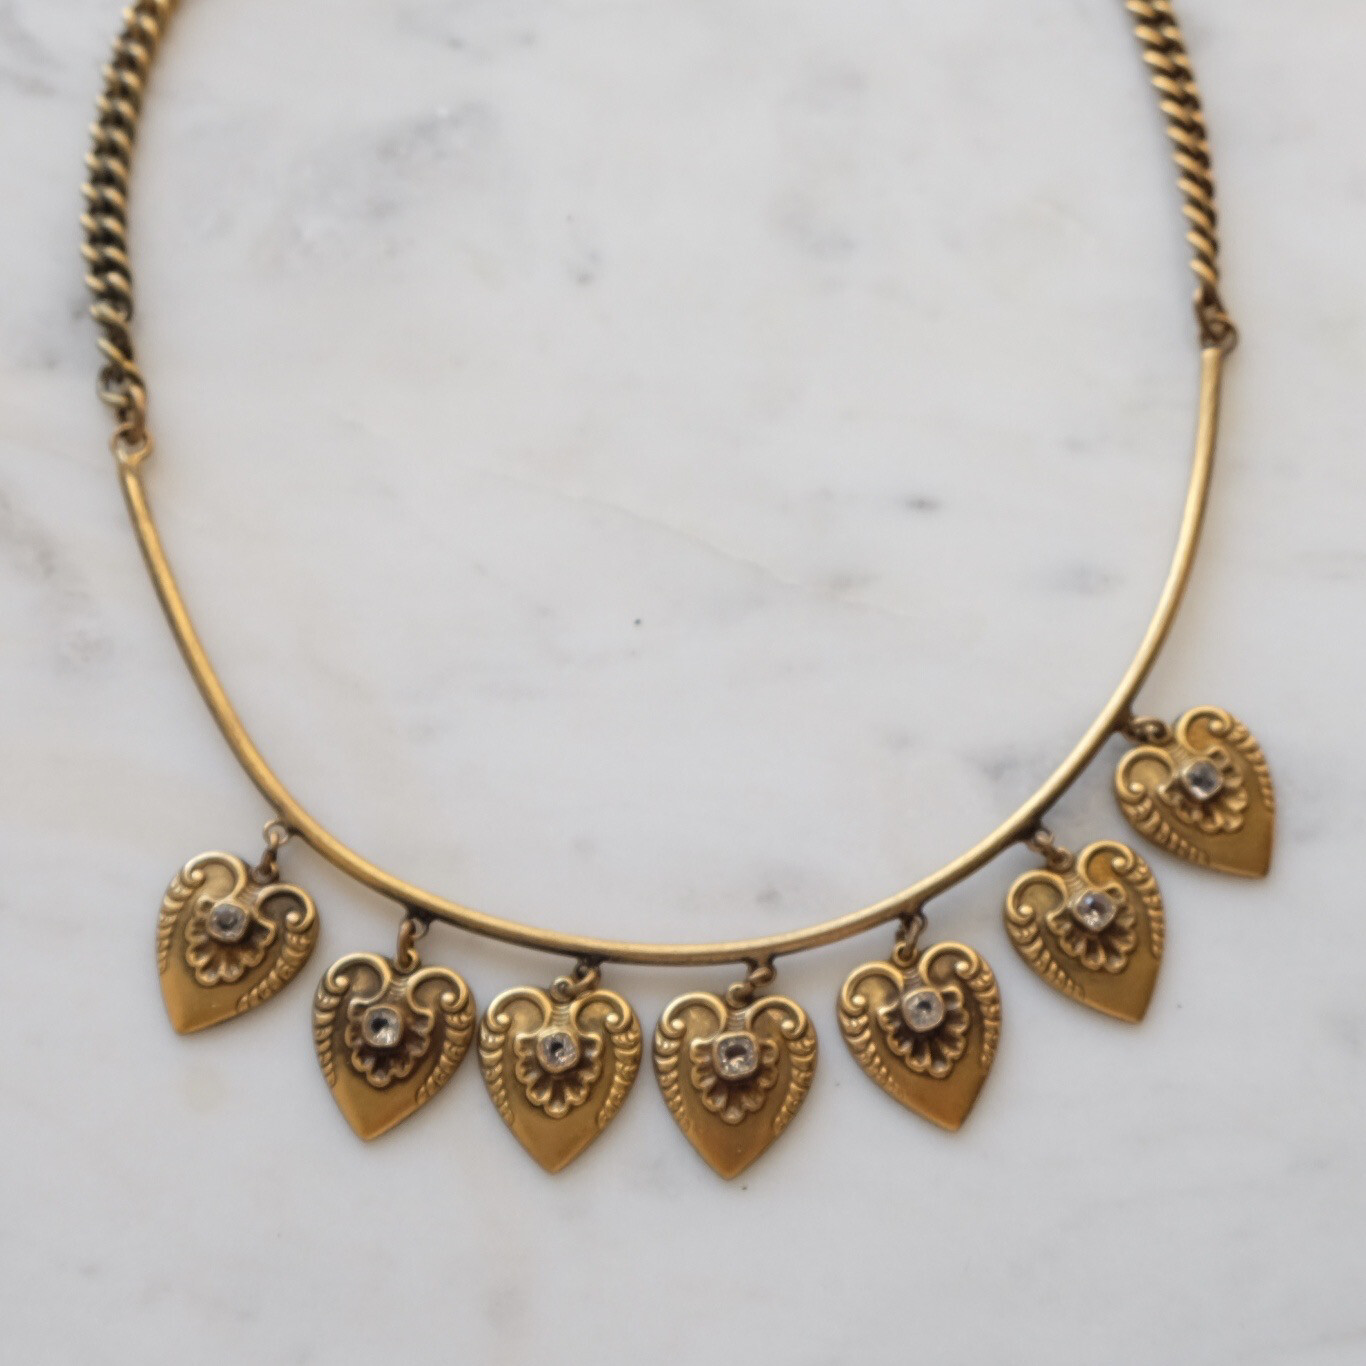 Vintage Joseff Of Hollywood Hearts Necklace